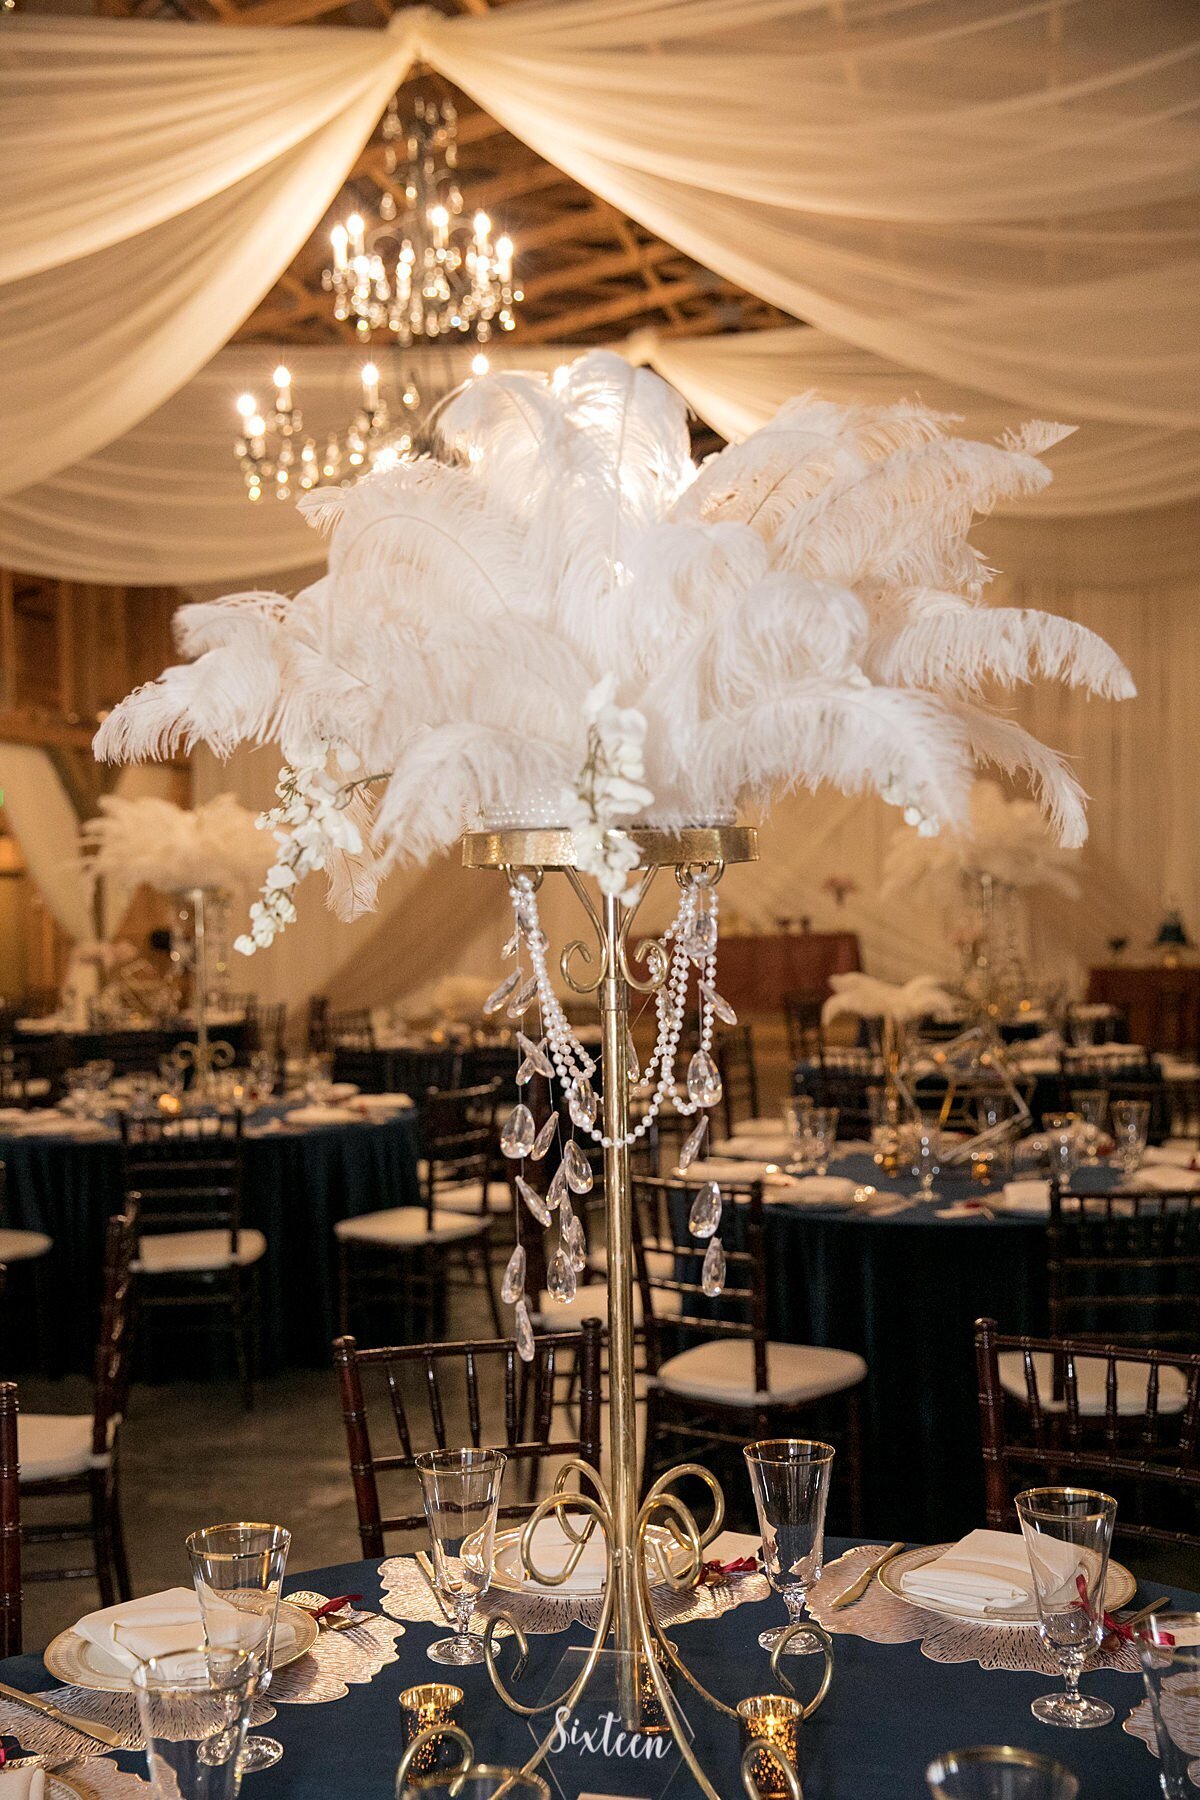 Tall ostrich feather centerpiece accented with hanging crystals on a tall gold stand. The table is set with a navy blue velvet table cloth, footed crystal water goblets with gold rims, ginko leaf chargers and ivory china plates with gold accents. The matte gold flatware has a small thank you note tied to each fork and there are gold votive candles on each table. Brown chiavari chairs with ivory cushions are placed around each table and the ceiling is covered in sheer ivory drapery accenting the gold and crystal candelabra chandeliers of the cedar wood barn at Saddle Woods Farm.